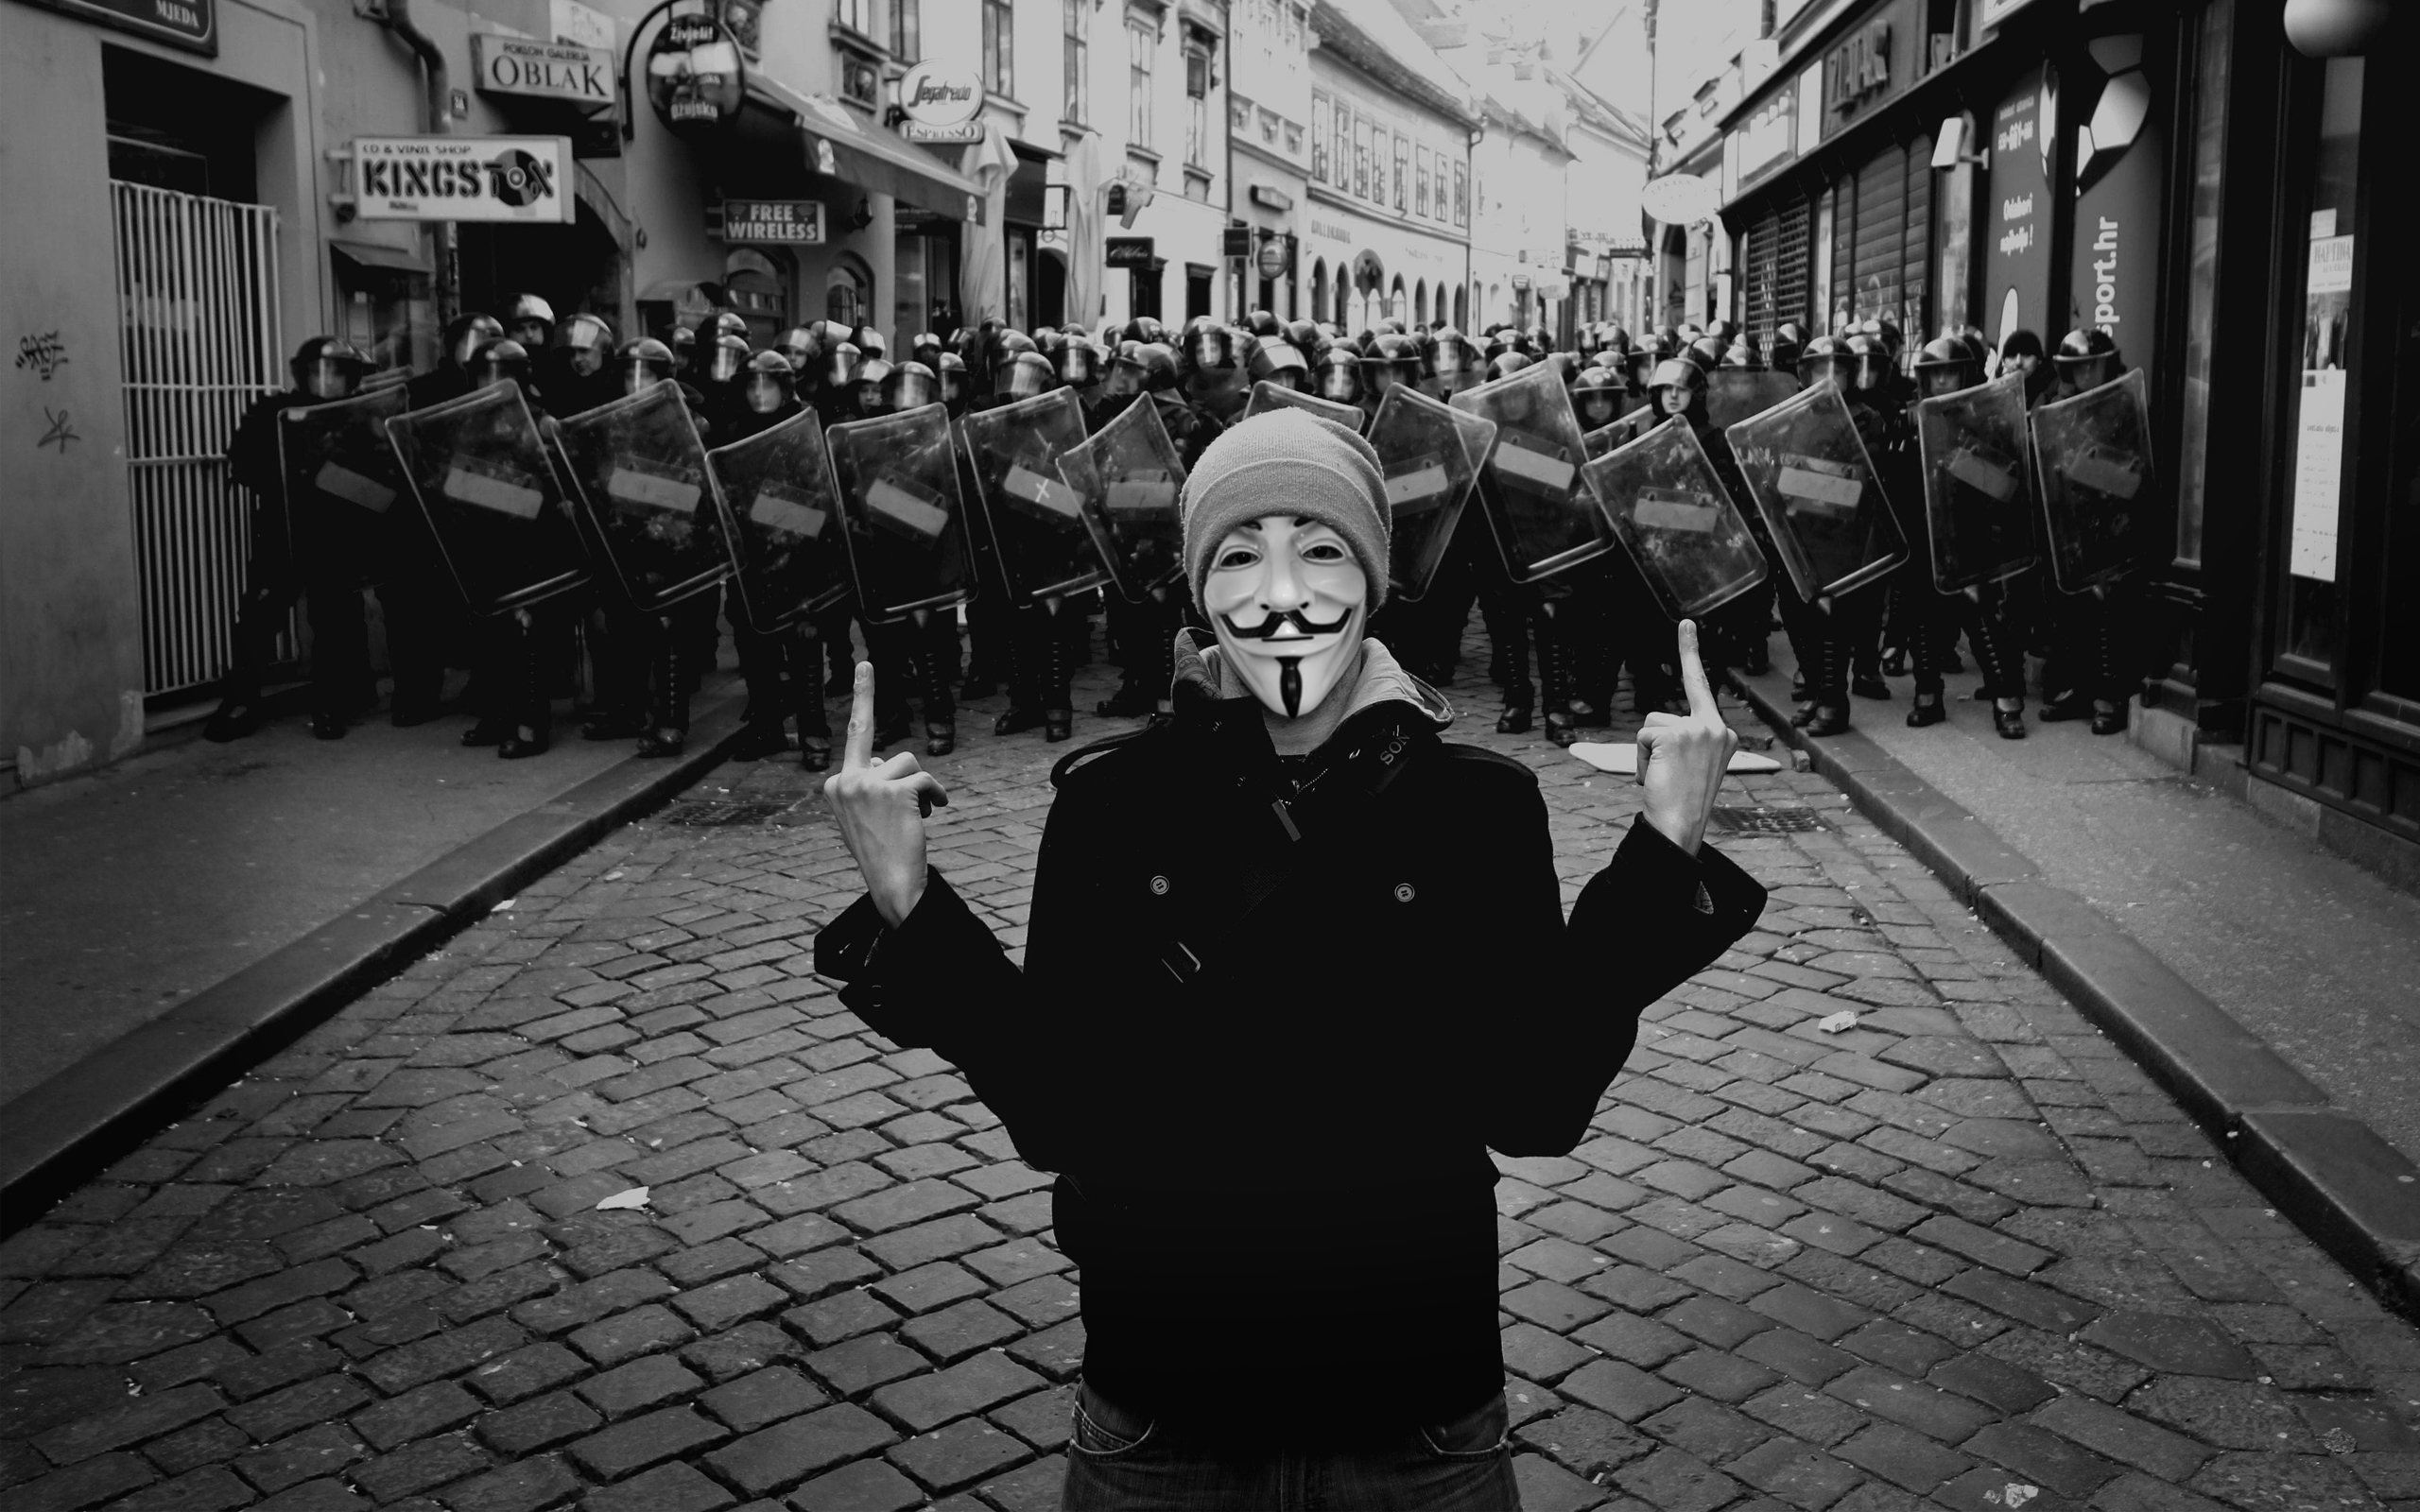 technology, anonymous, anarchy UHD